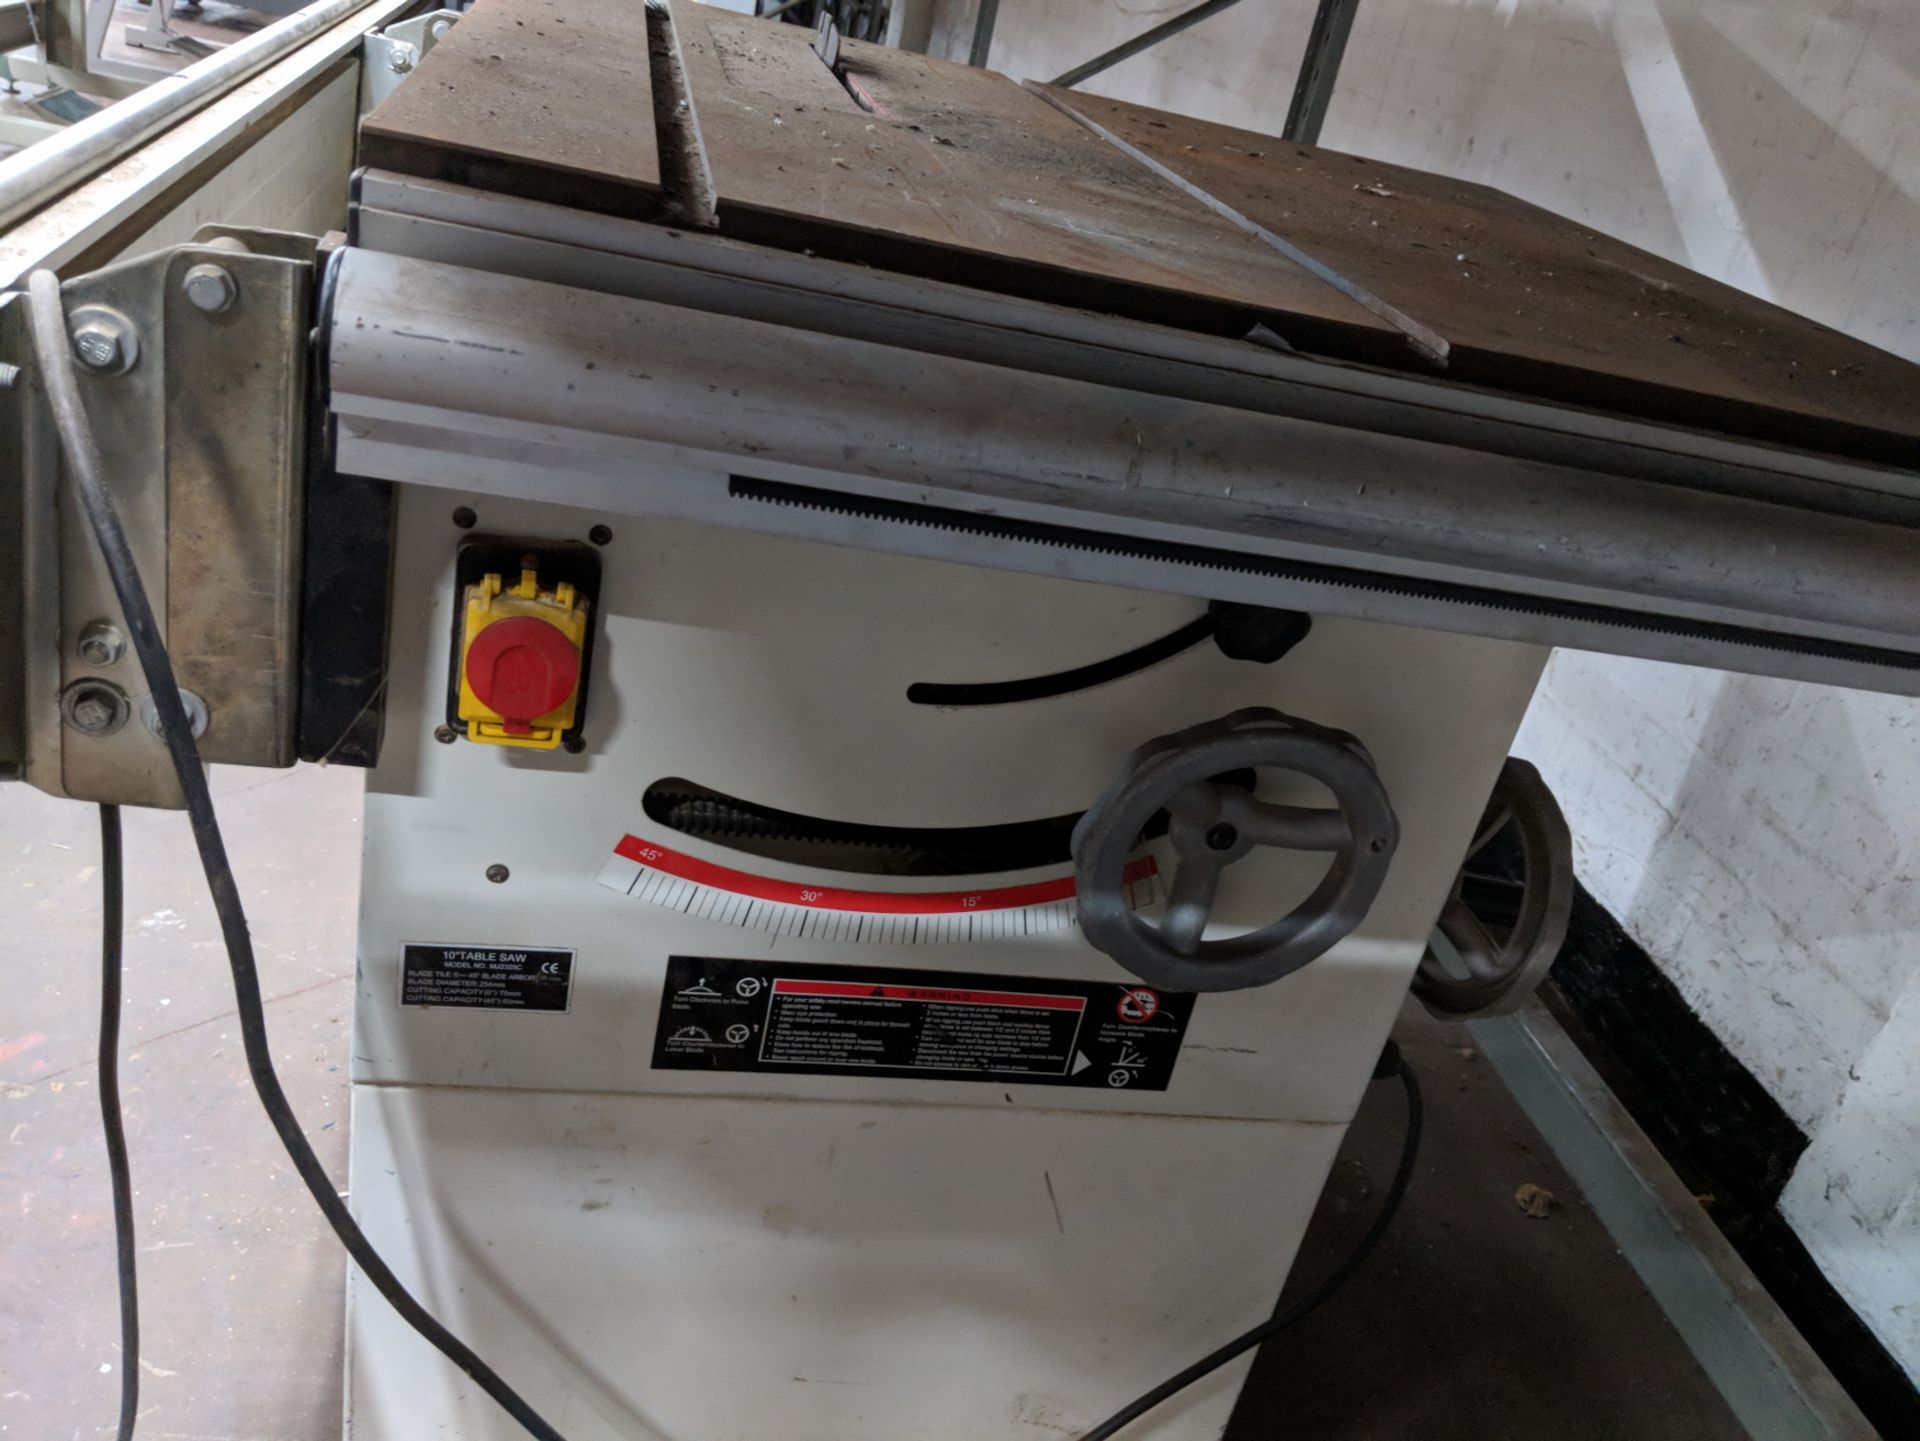 10" table saw MJ2325C IMPORTANT: Please remember goods successfully bid upon must be paid for and - Image 4 of 7